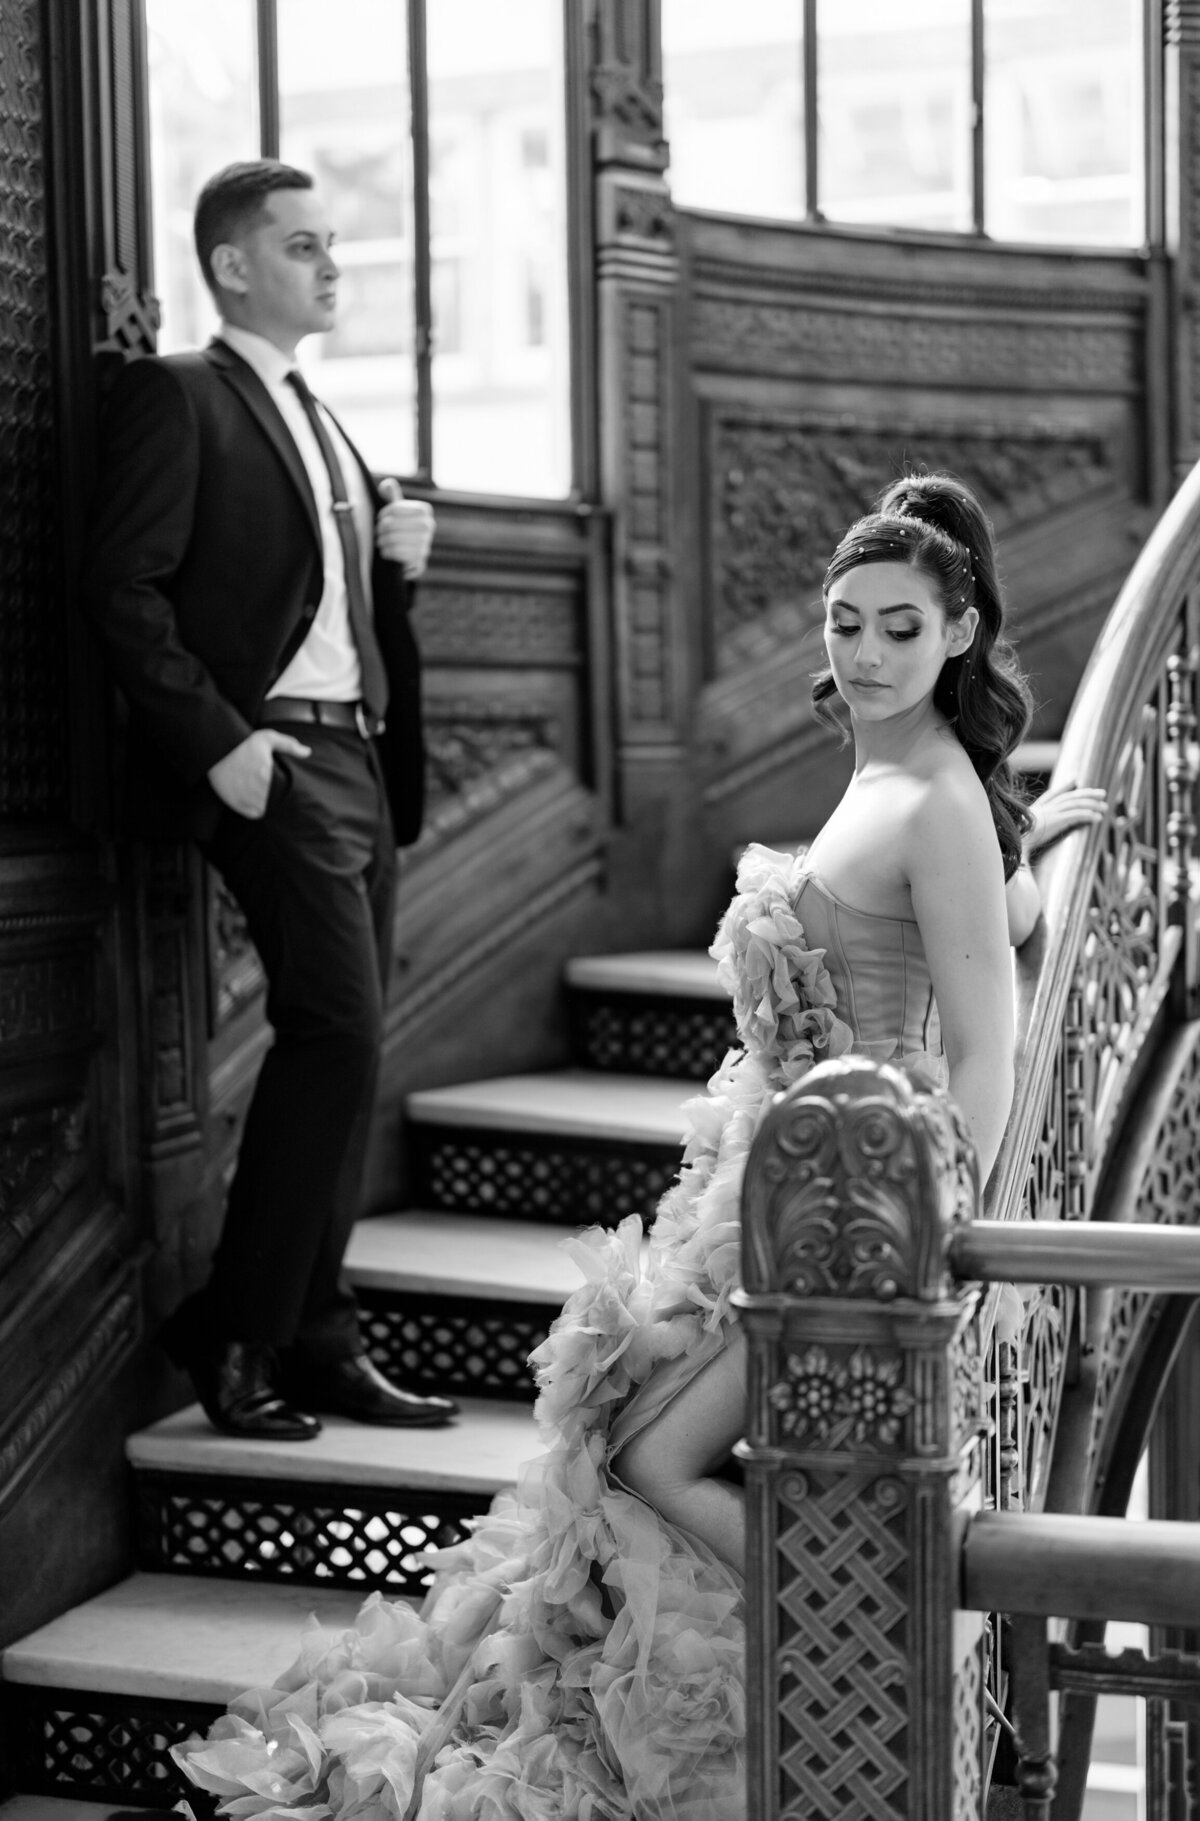 Aspen-Avenue-Chicago-Wedding-Photographer-Rookery-Engagement-Session-Histoircal-Stairs-Moody-Dramatic-Magazine-Unique-Gown-Stemming-From-Love-Emily-Rae-Bridal-Hair-FAV-4